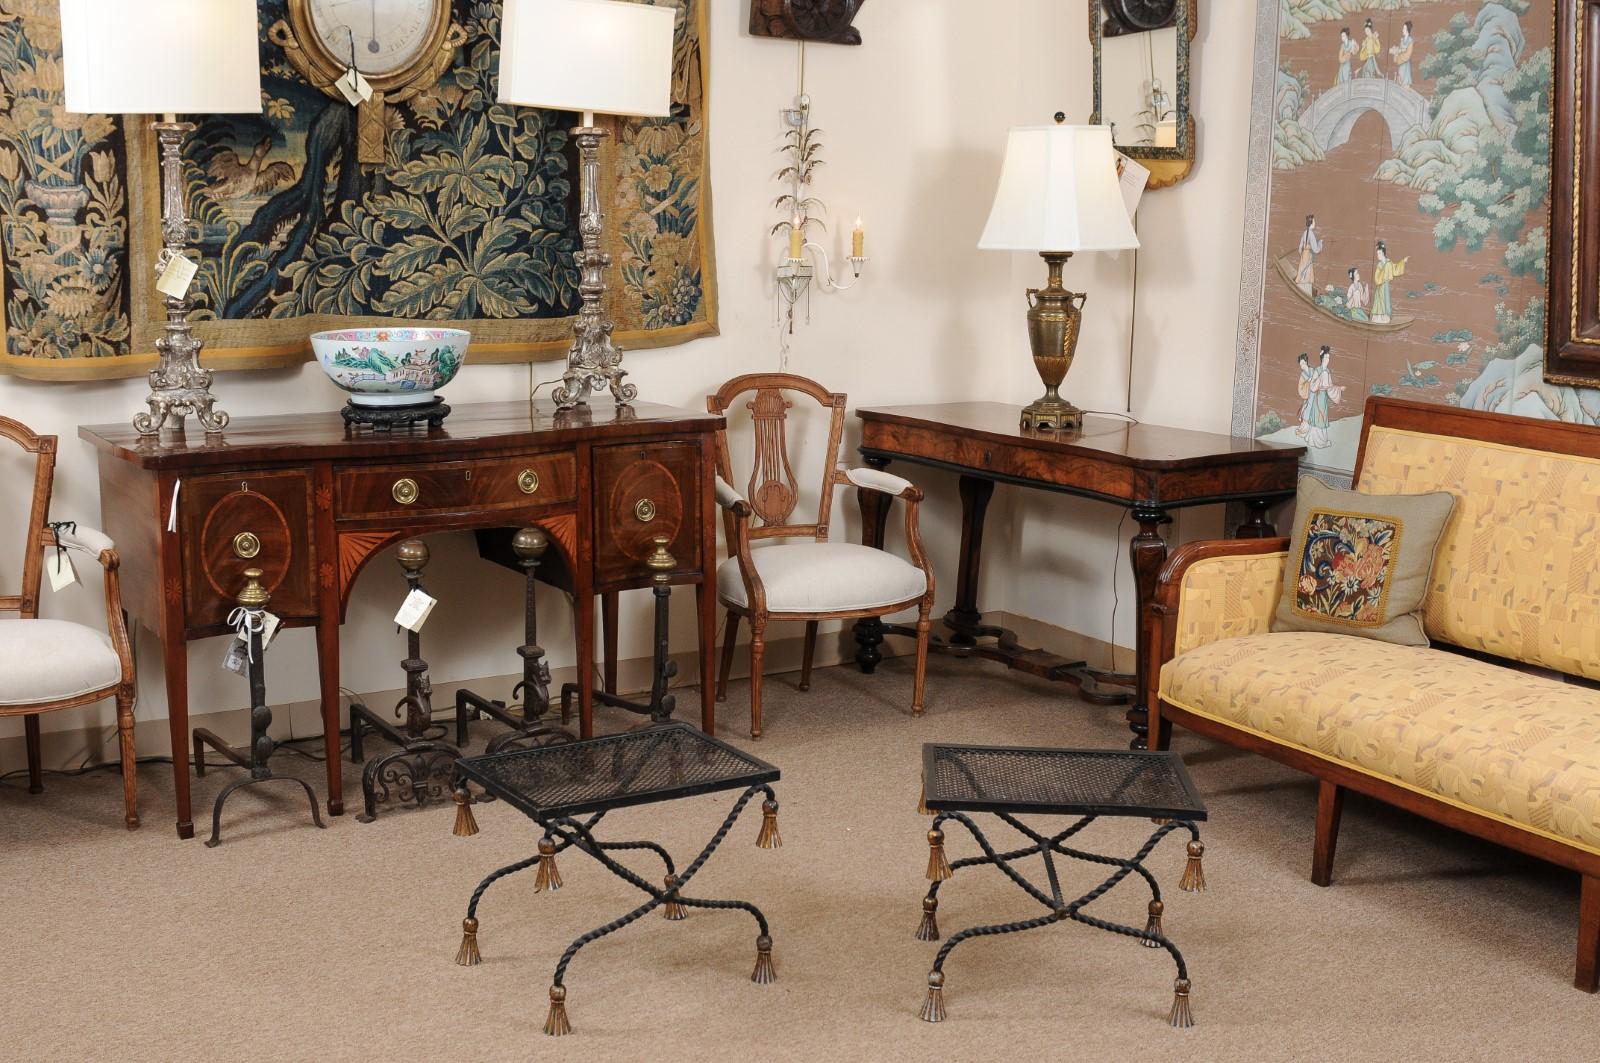 Pair of Vintage Black Painted & Gilt Iron Benches with Tassels, 20th Century In Good Condition For Sale In Atlanta, GA